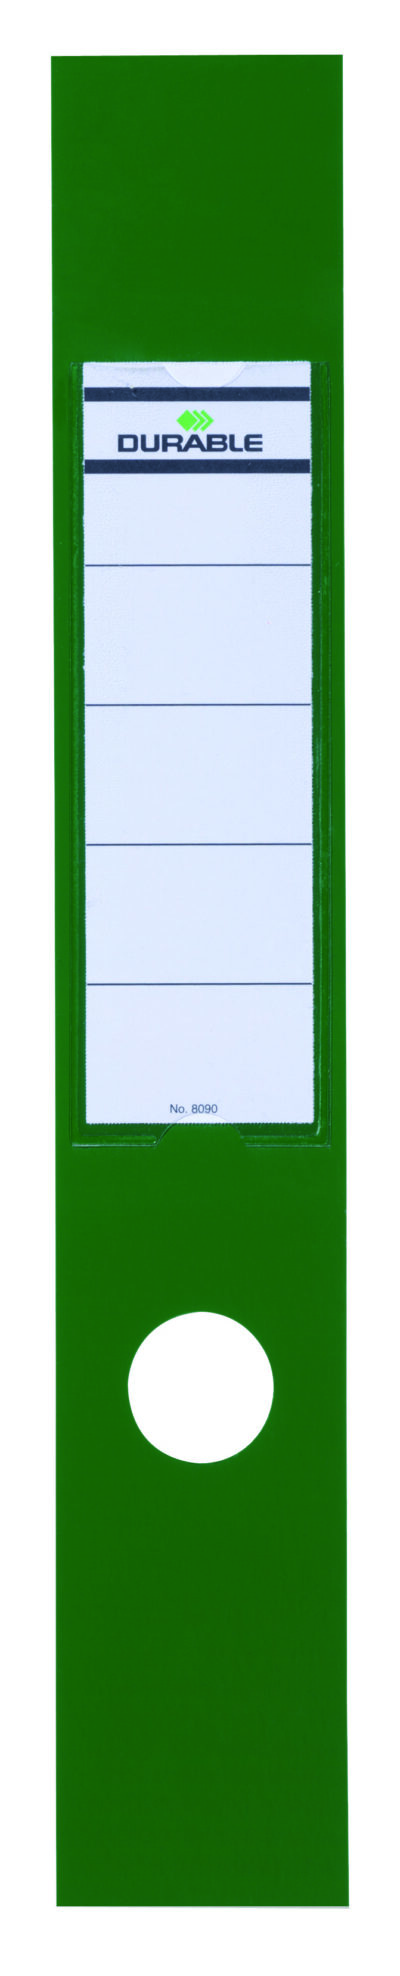 Durable Ordofix Lever Arch File Spine Label PVC 60x390mm Green (Pack 10) - 809005